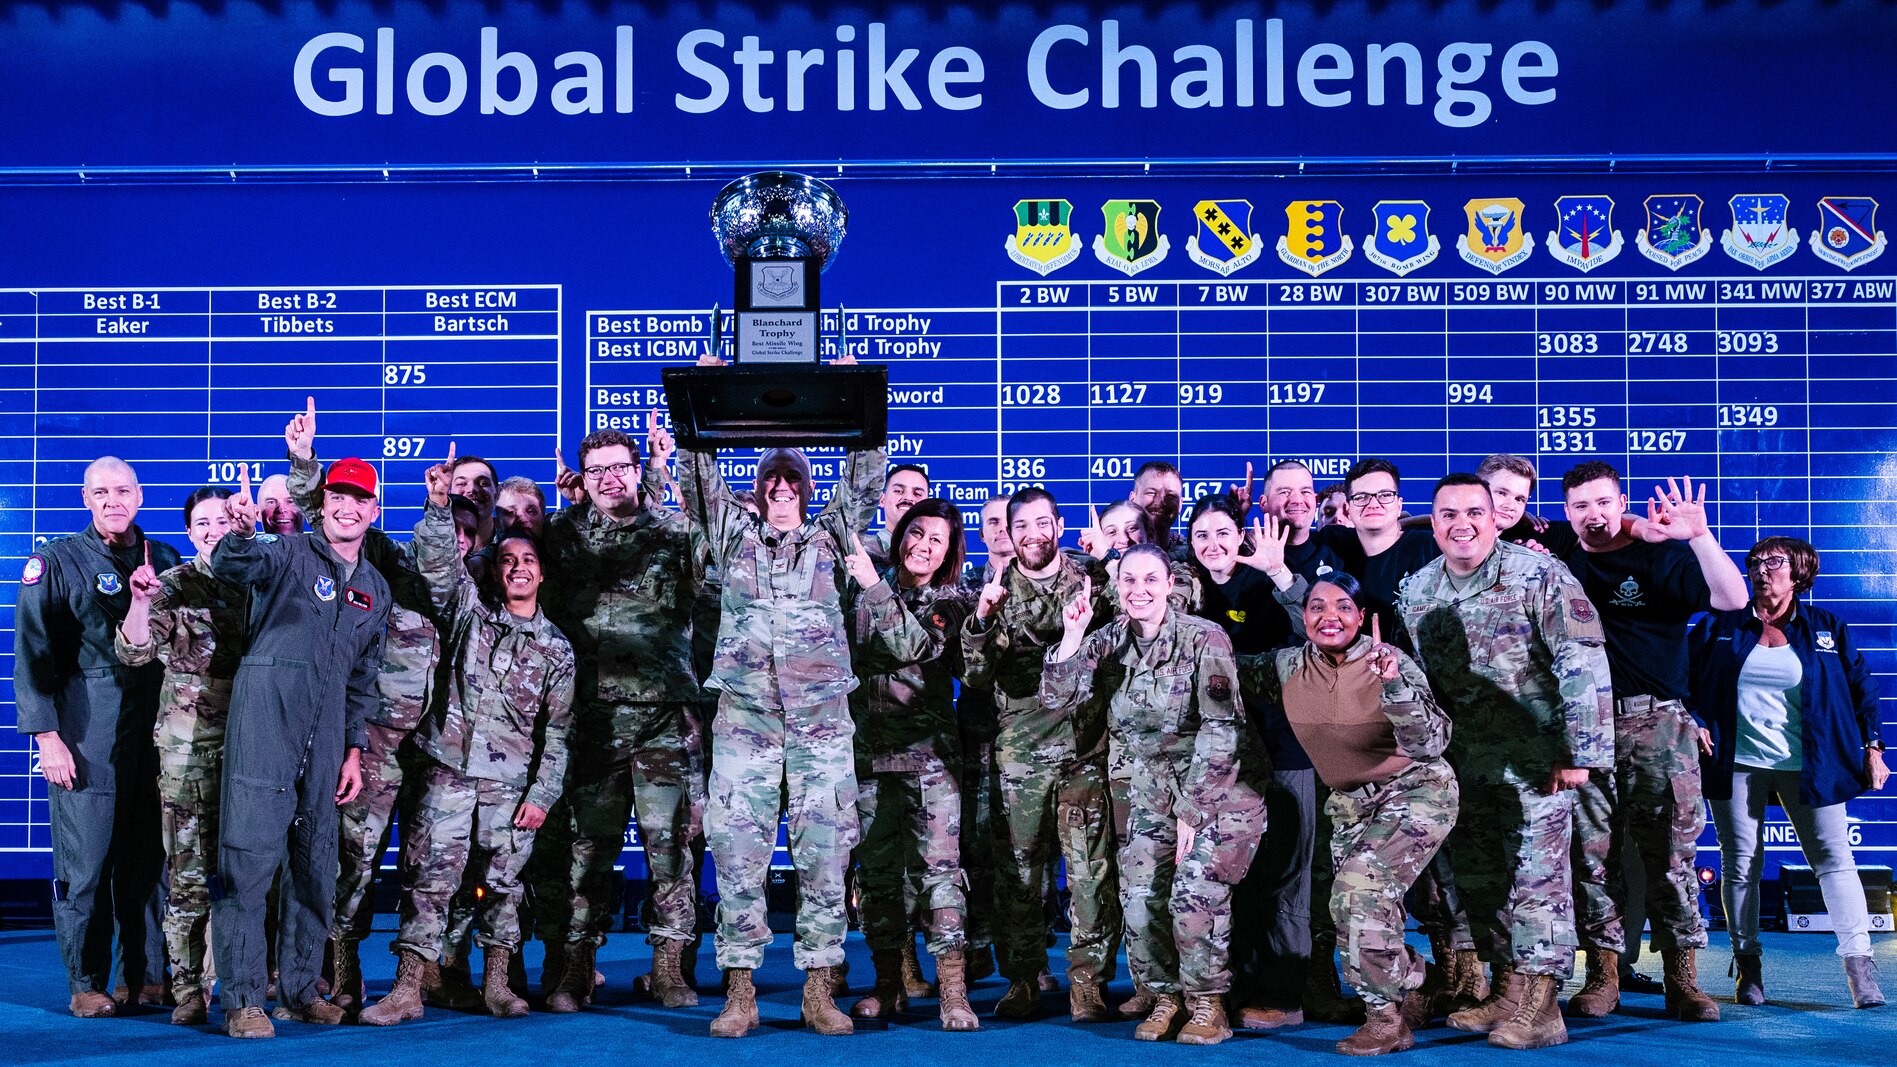 A large group photo of uniformed Air Force personnel who are celebrating by holding a large trophy up.